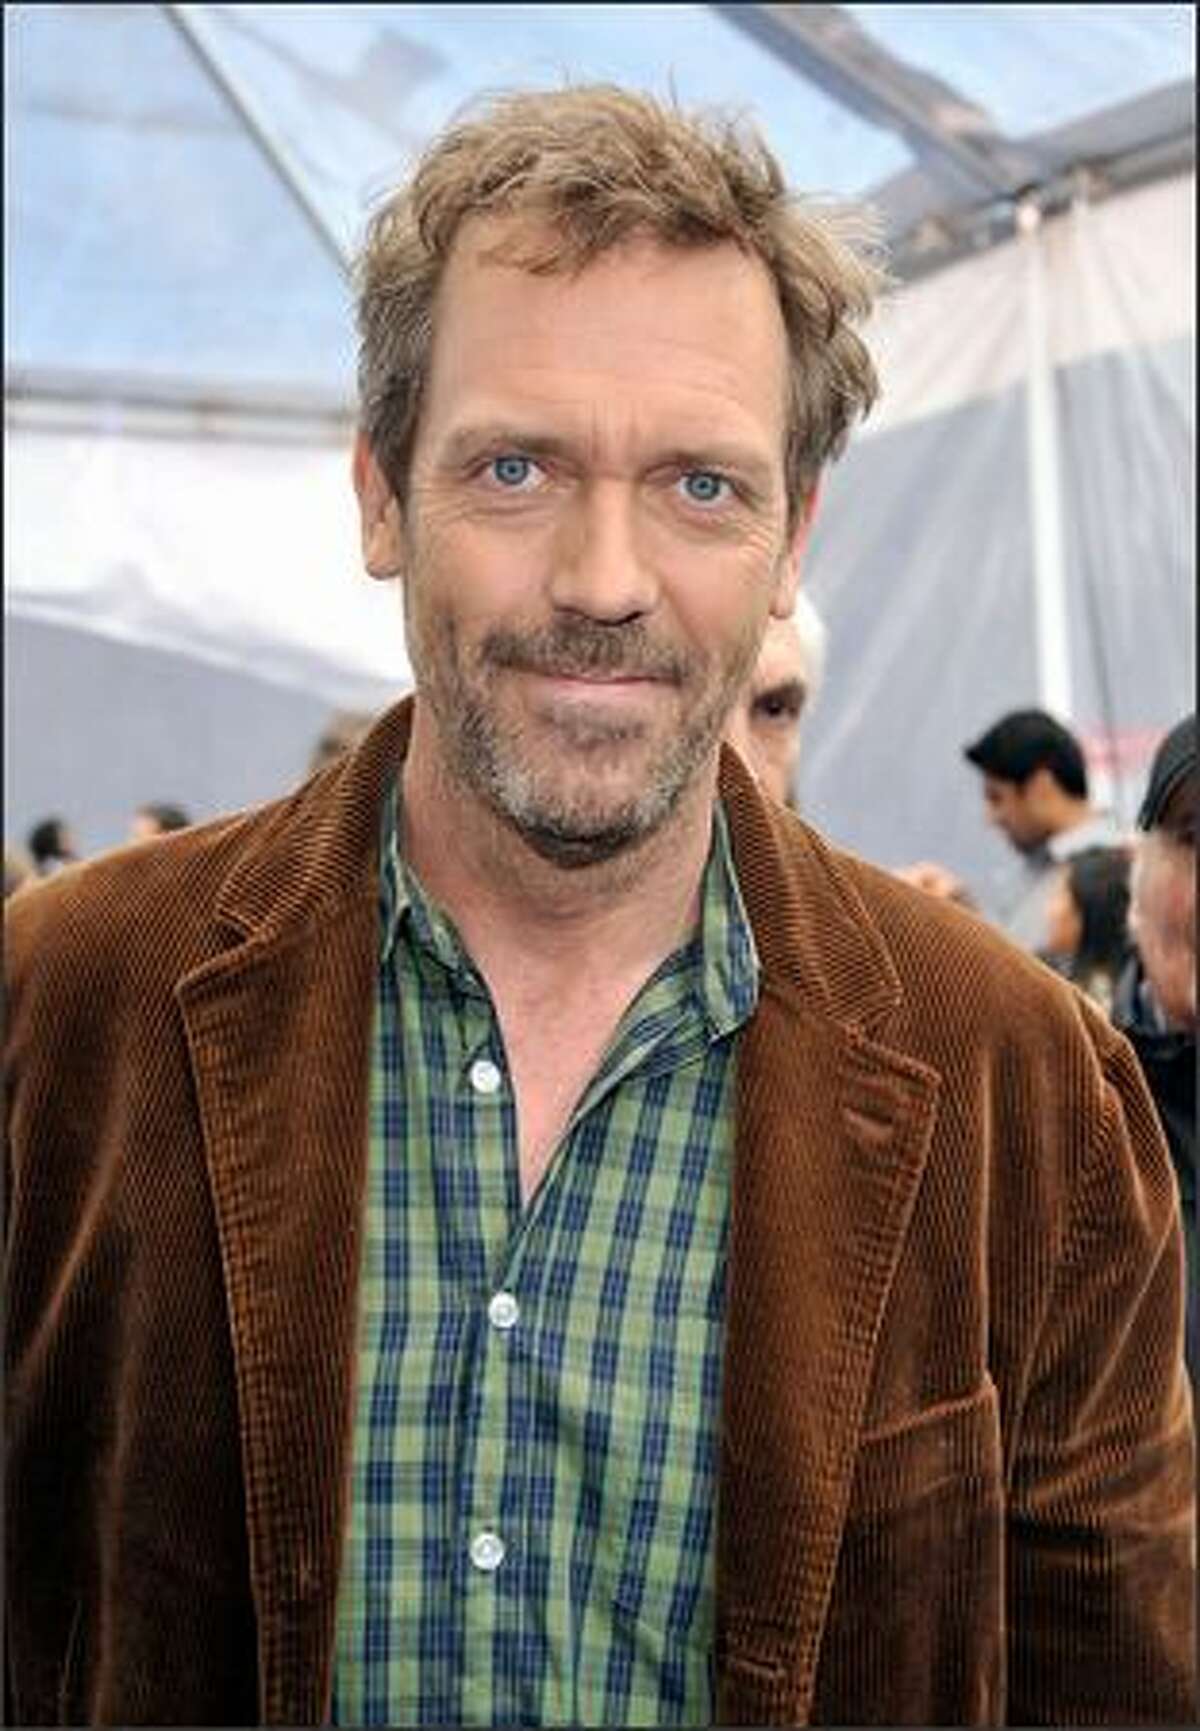 Actor Hugh Laurie arrives at the premiere of Dreamworks' "Monsters vs. Aliens" held at the Gibson Amphitheatre in Universal City, Calif.